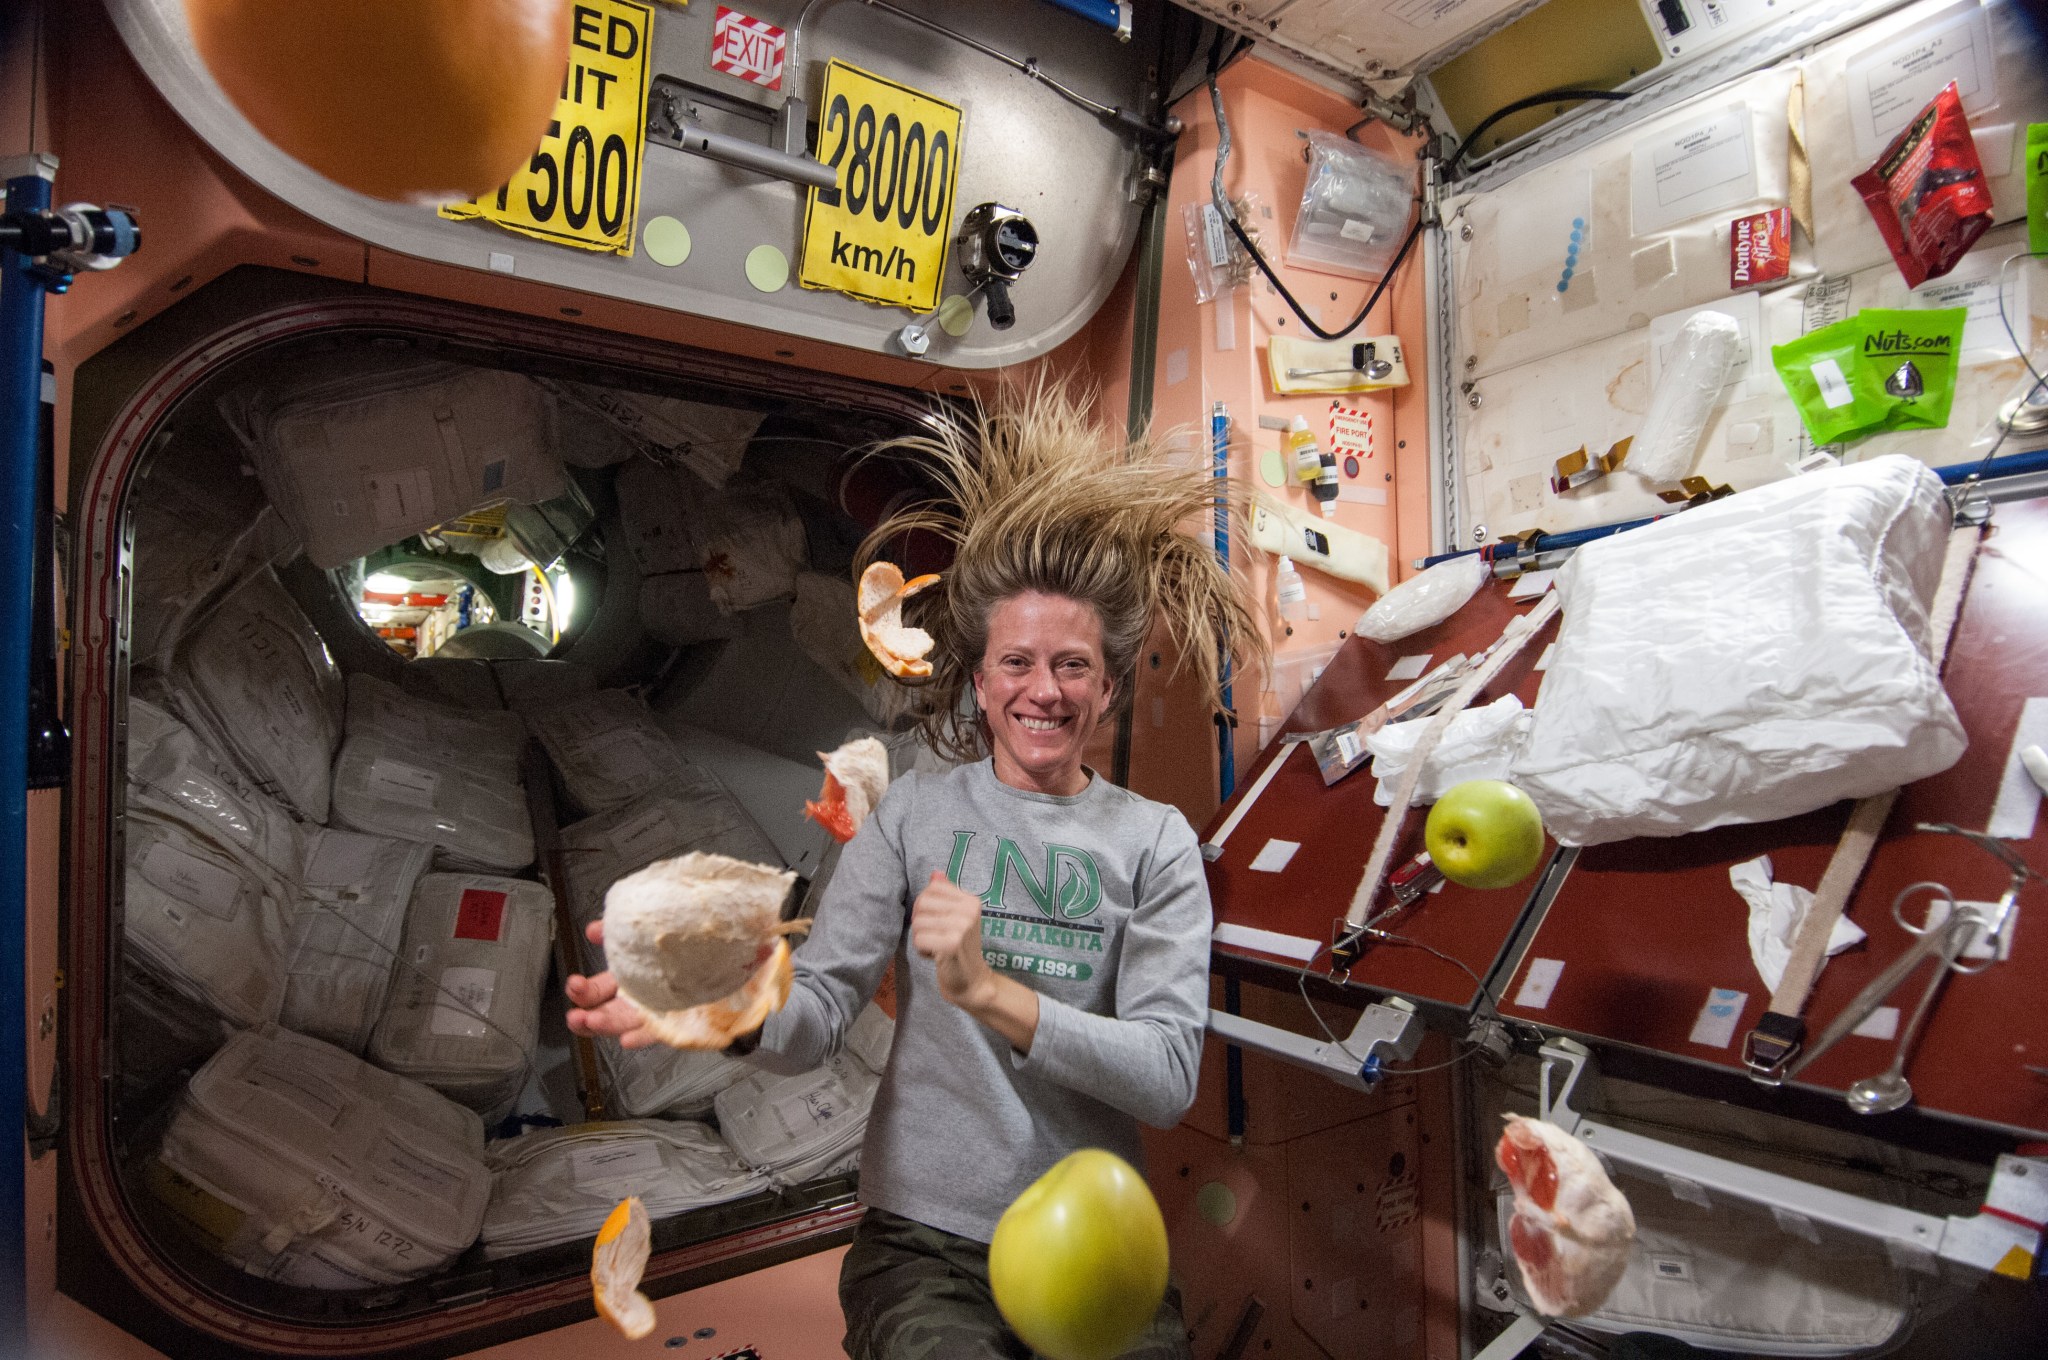 Astronaut Karen Nyberg pictured near fresh fruit floating in the space station